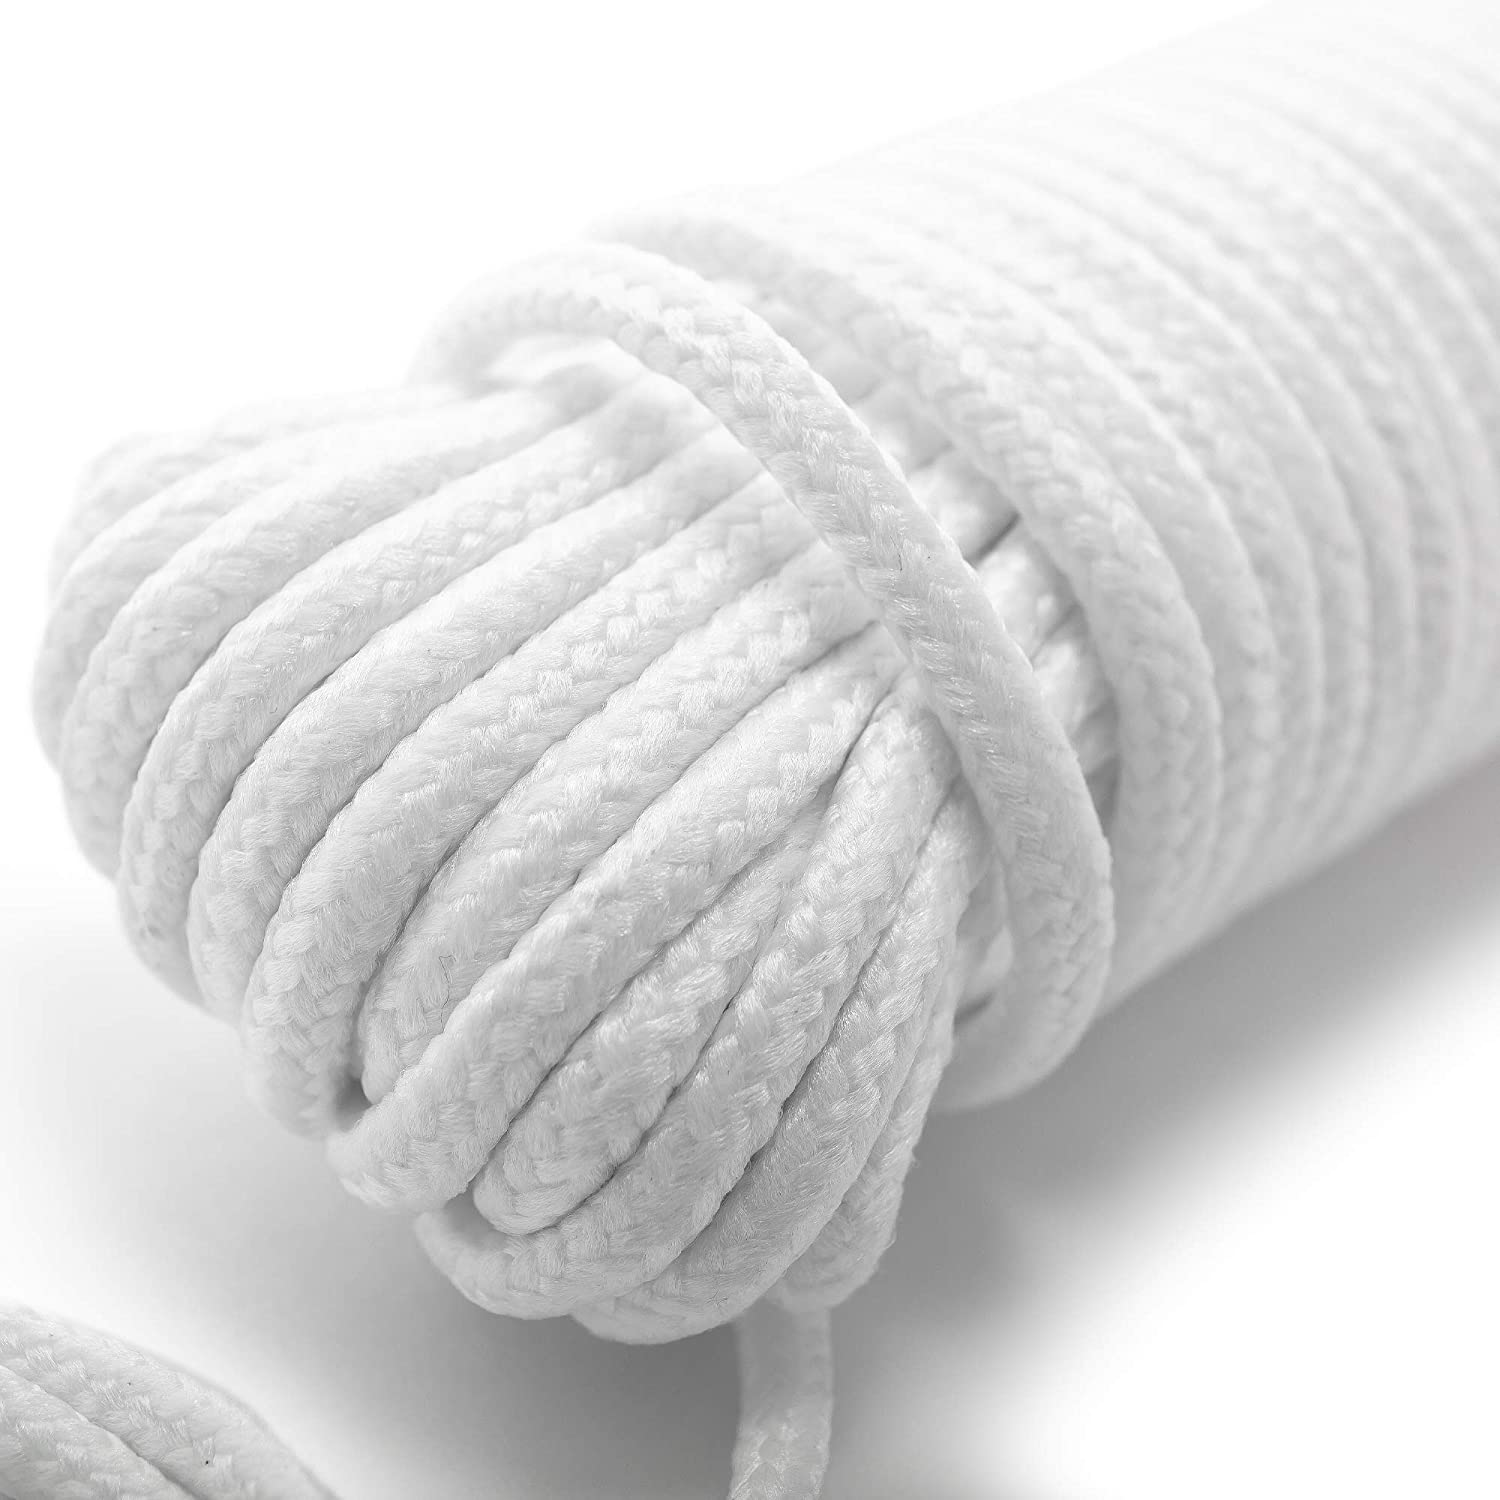 All-Purpose Weather Resistant Clothesline Cord - Cotton Cloth Braided Rope - 1 Line x 50 Feet - White - Smart Design® 4